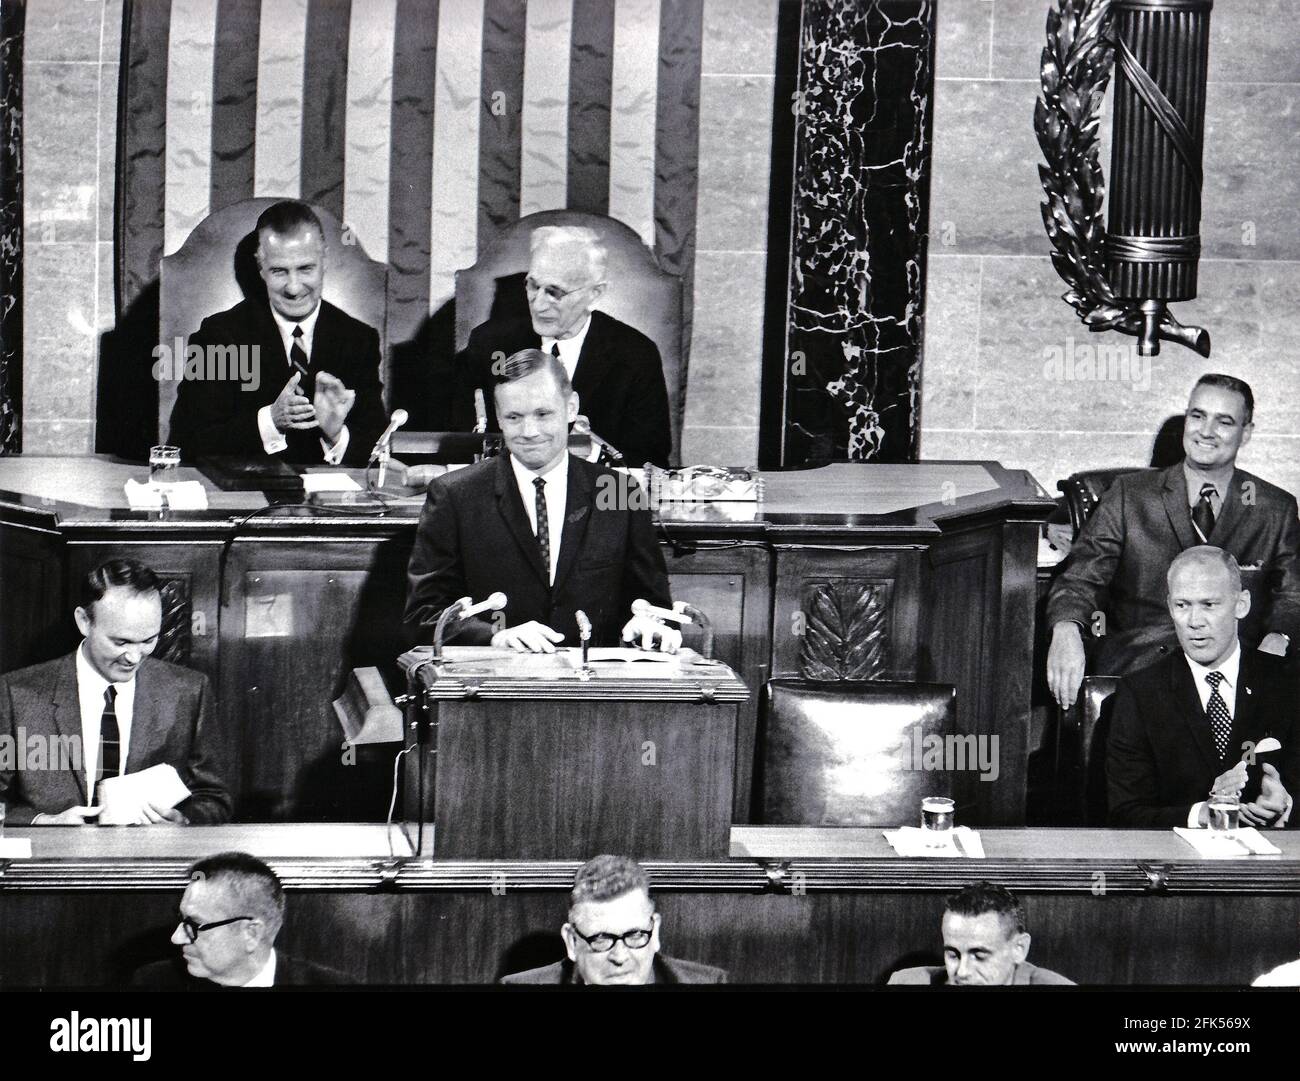 Washington, DC - (FILE) -- Astronaut Neil Armstrong displays his boyish grim as he shares the rostrum in the United States House of Representatives with fellow lunar travelers Michael Collins, left, and Edwin E. 'Buzz' Aldrin, Jr., right, as they address a Joint Session of Congress on September 16, 1969. Armstrong's remarks enjoyed the applause of Vice President Spiro Agnew, left rear, and Speaker of the House John McCormick (Democrat of Massachusetts), rear right.Credit: Arnie Sachs/CNP /MediaPunch Stock Photo